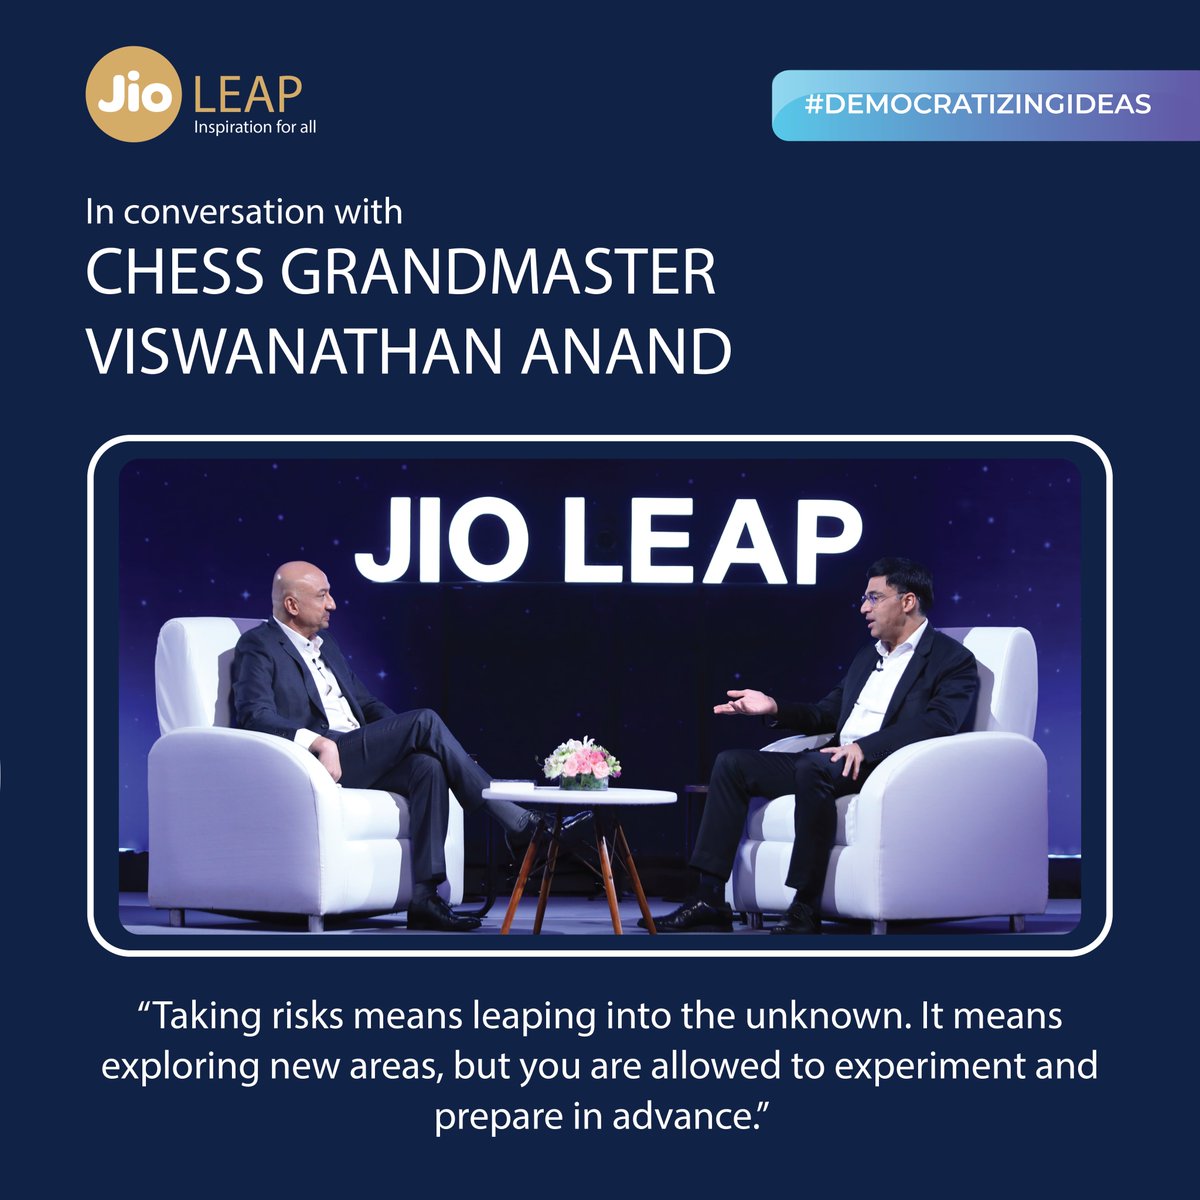 WATCH: Five-time World Champion, Chess Grandmaster, and Padma Vibhushan Viswanathan Anand shares insights from his incredible and inspiring journey to global success.

Jio LEAP: Democratizing inspiration, democratizing ideas

youtube.com/watch?v=1-Rnga…

#JioLeap #DemocratizingIdeas…